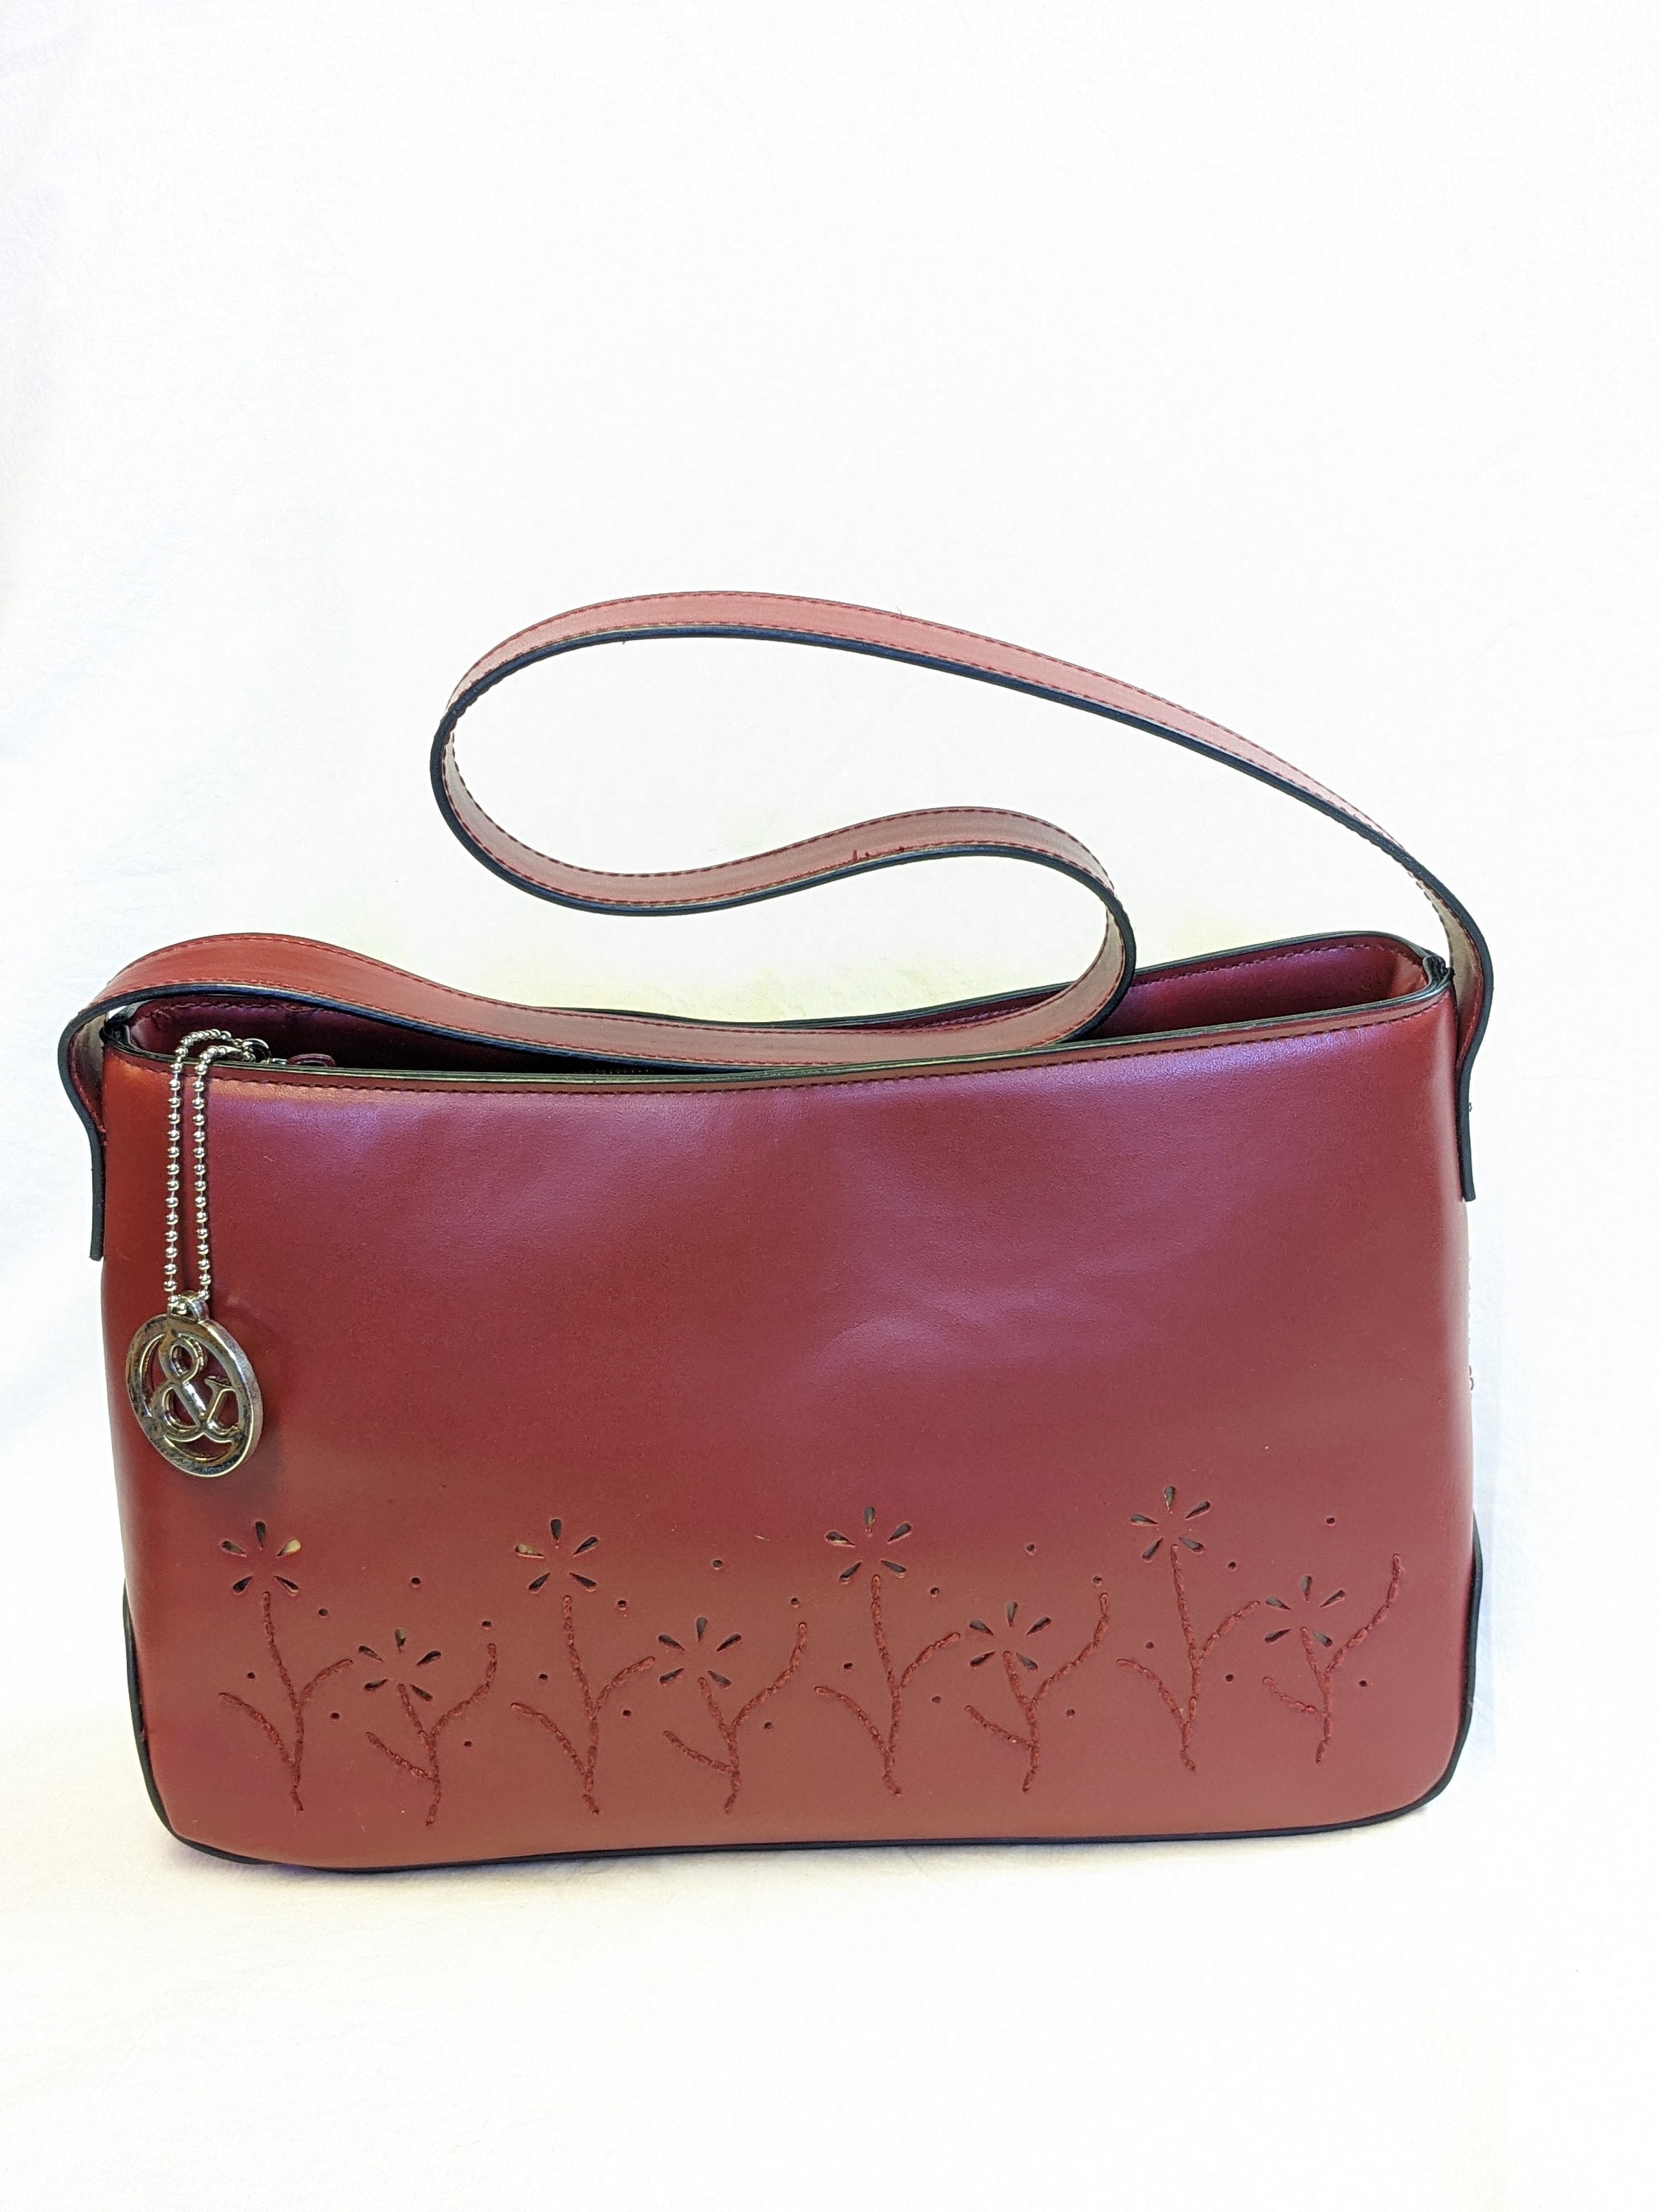 Dissona Gorgeous Red Leather Shoulder Bag